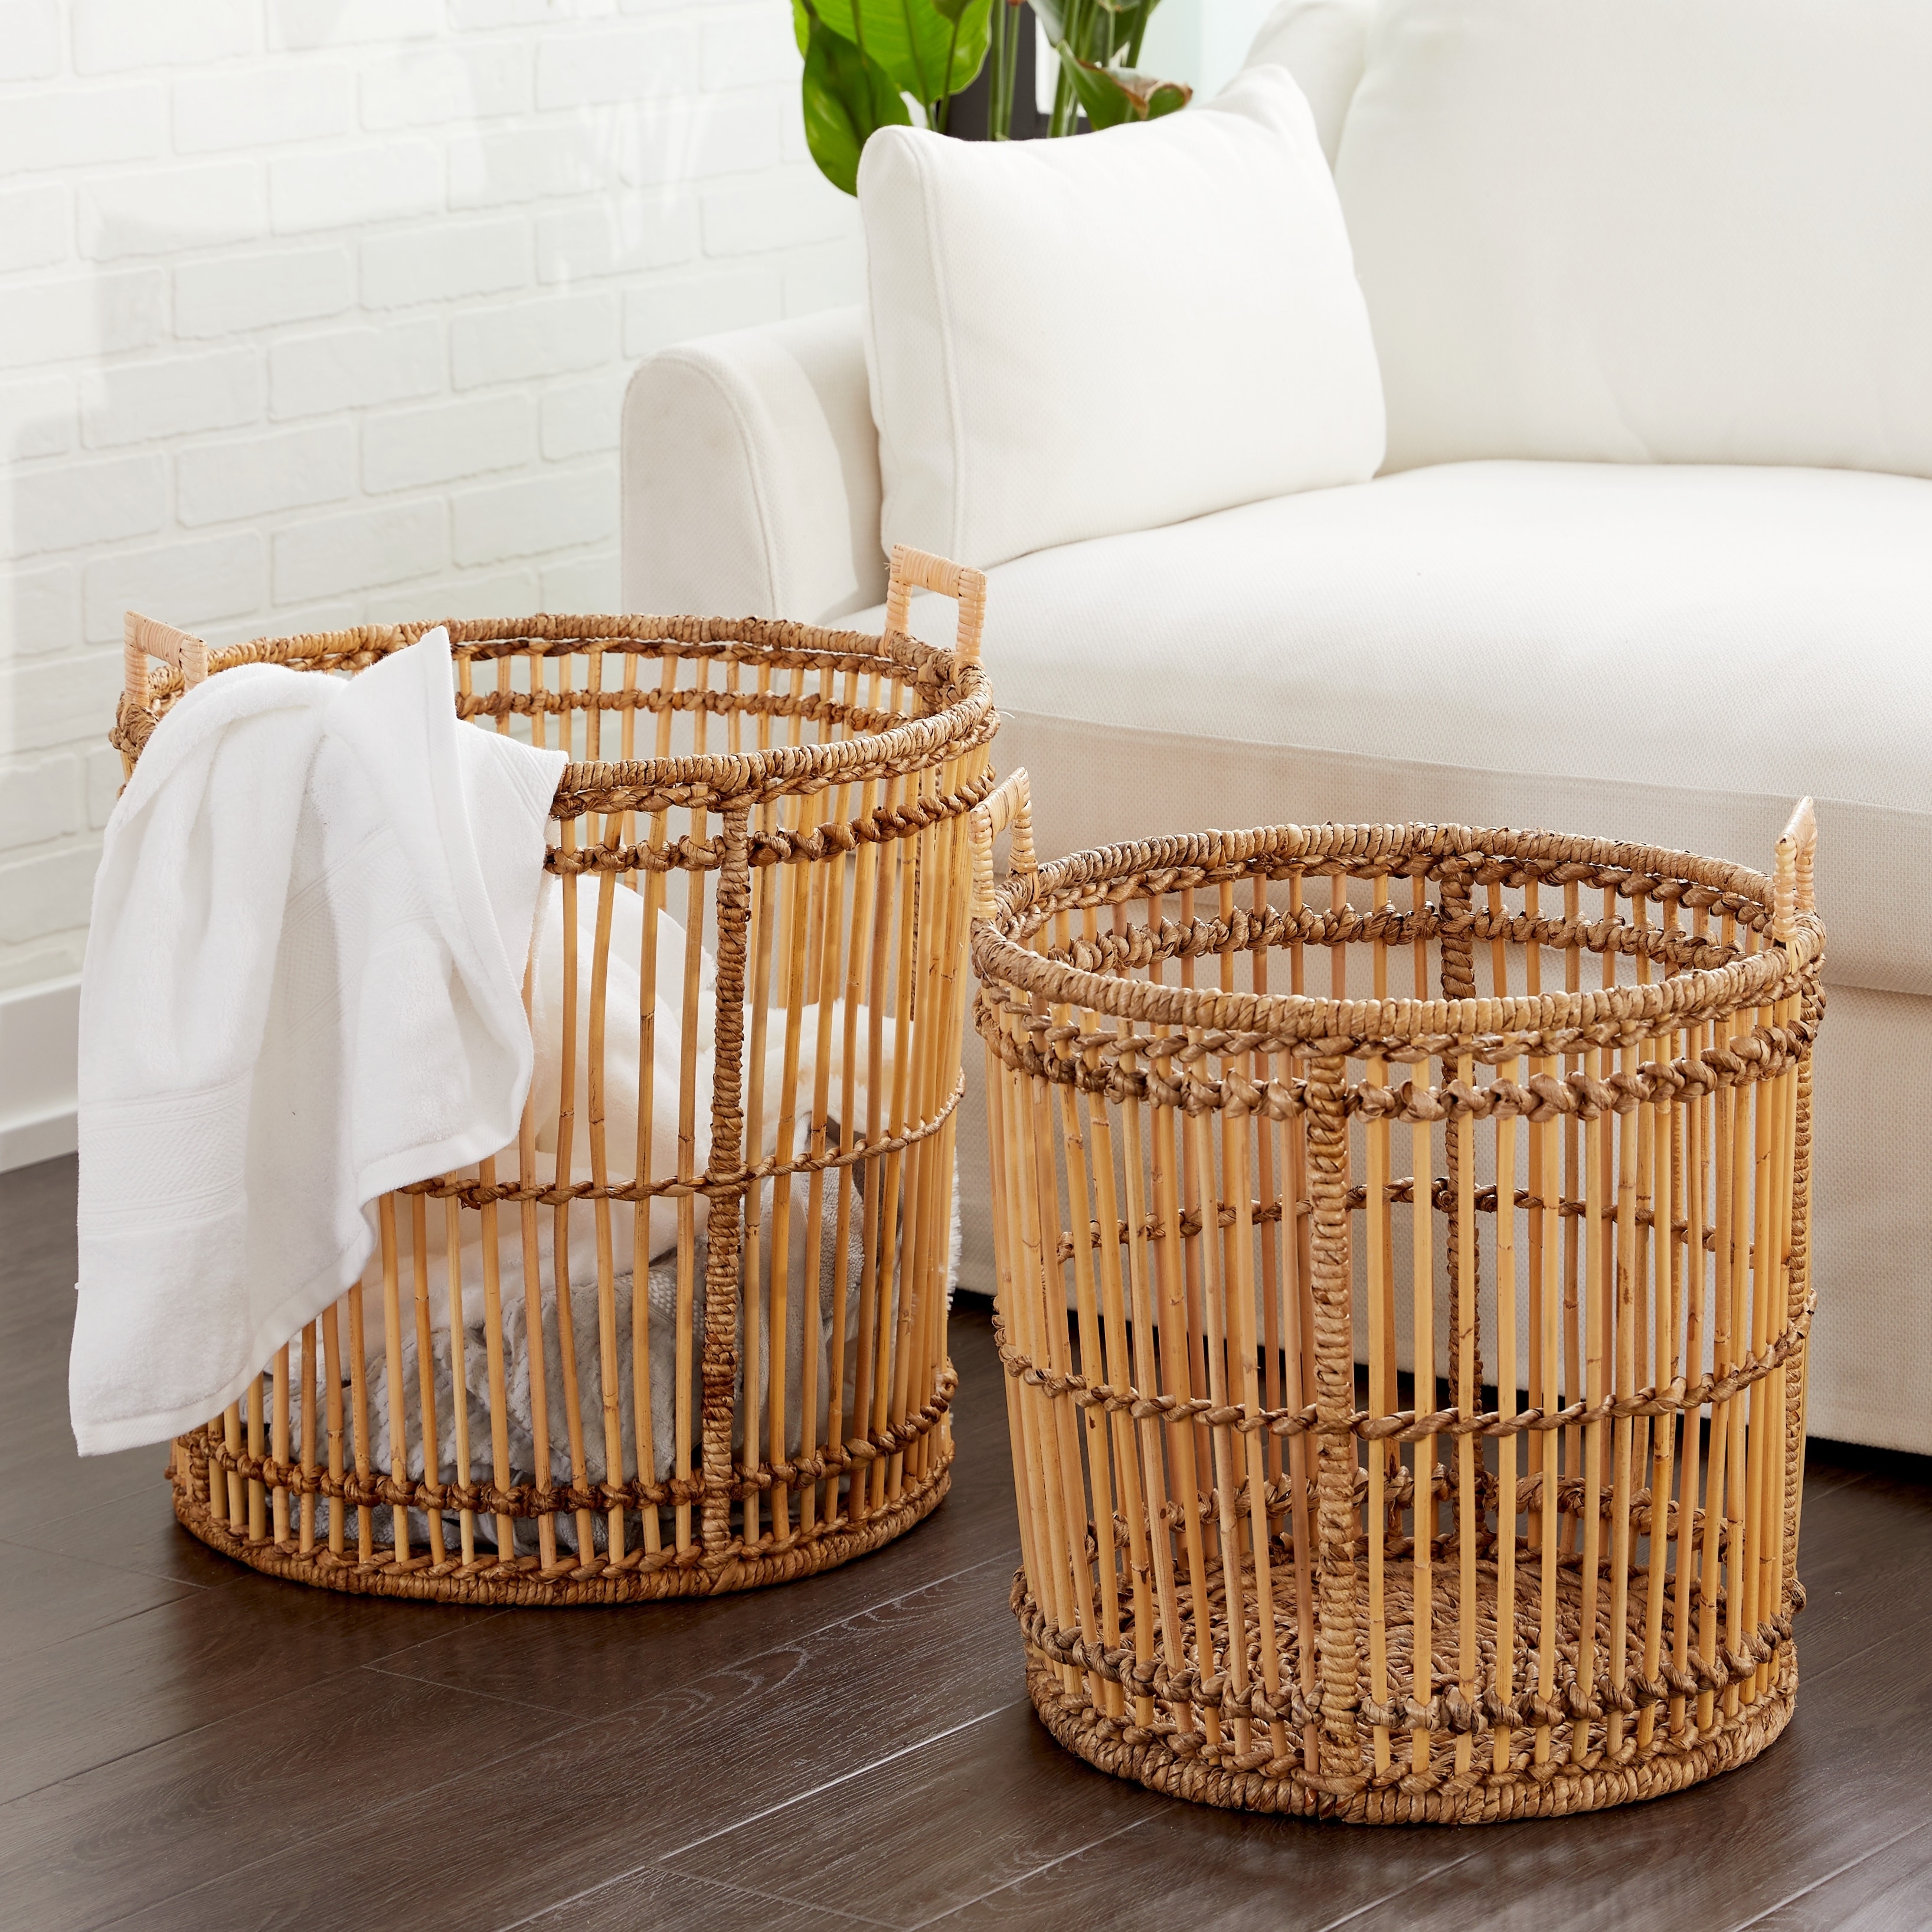 https://ak1.ostkcdn.com/images/products/28889730/Studio-350-Large-Birdcage-Shaped-Natural-Bamboo-Baskets-w-Banana-Leaf-Detail-cafd9d47-835f-40ca-9e76-5f78cb4f202e.jpg